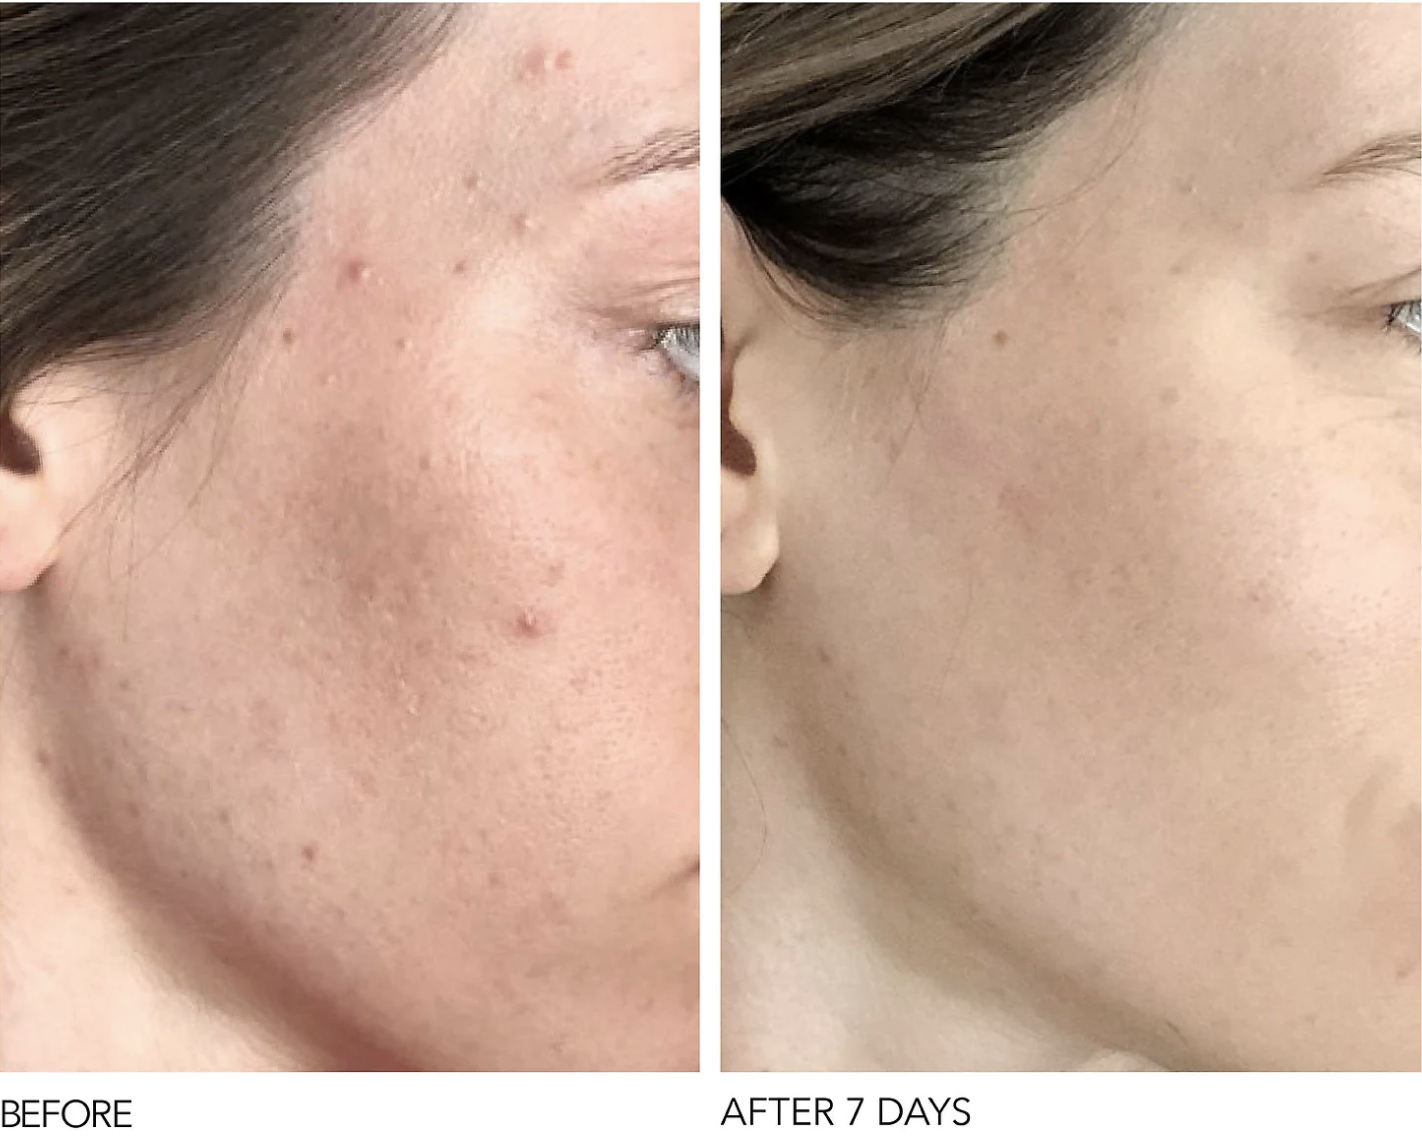 A model with acne and skin texture on their cheek on the left before use, and reduced acne and texture on the right after 7 days of use